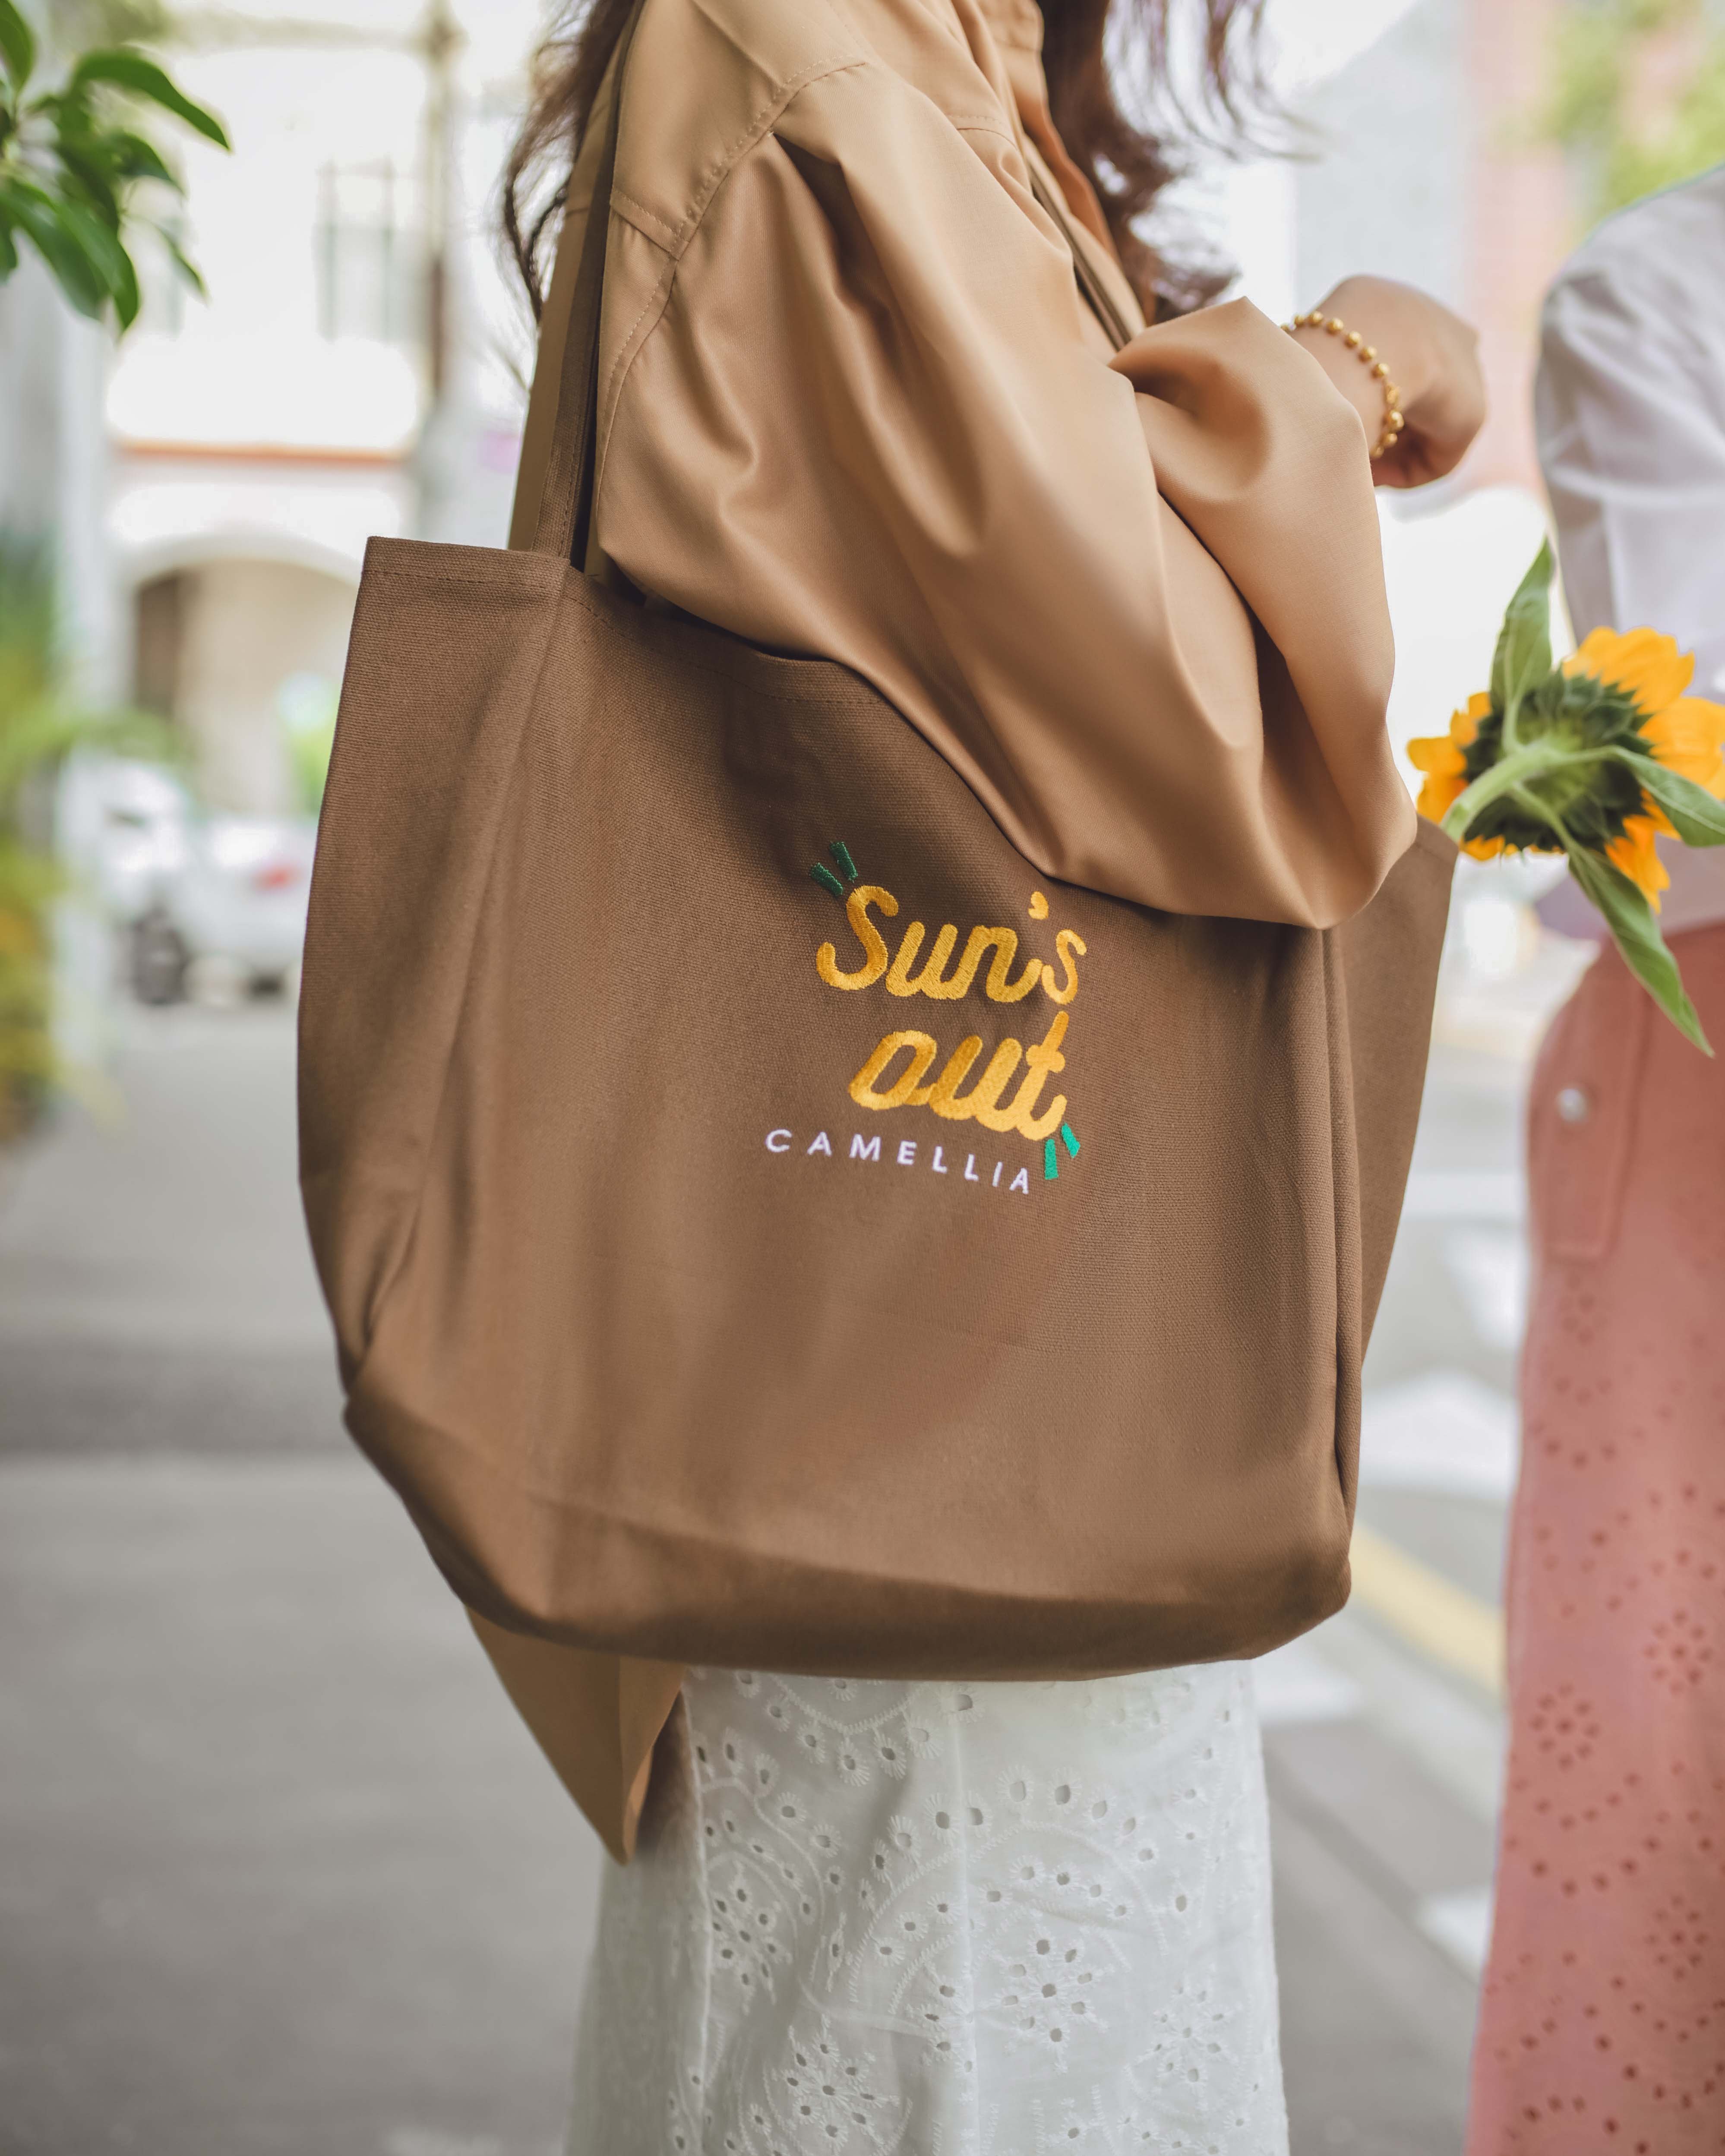 SUN'S OUT TOTEBAG IN BROWN